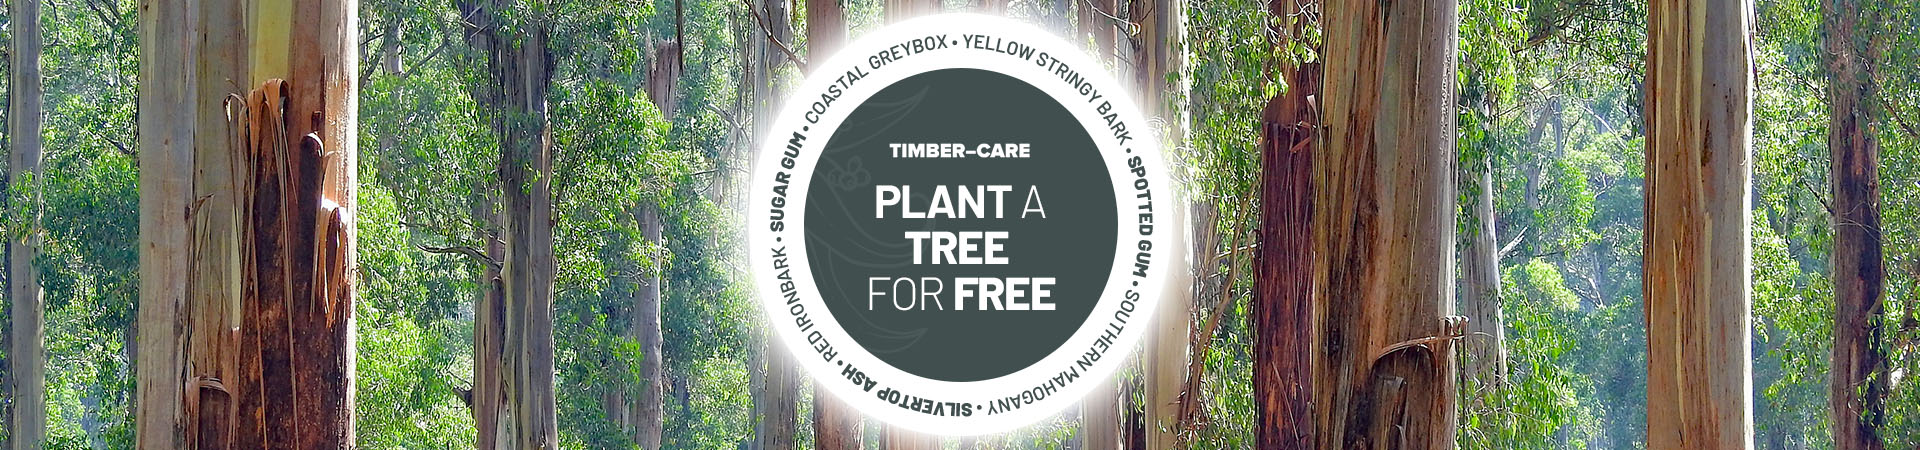 Plant A Tree For Free